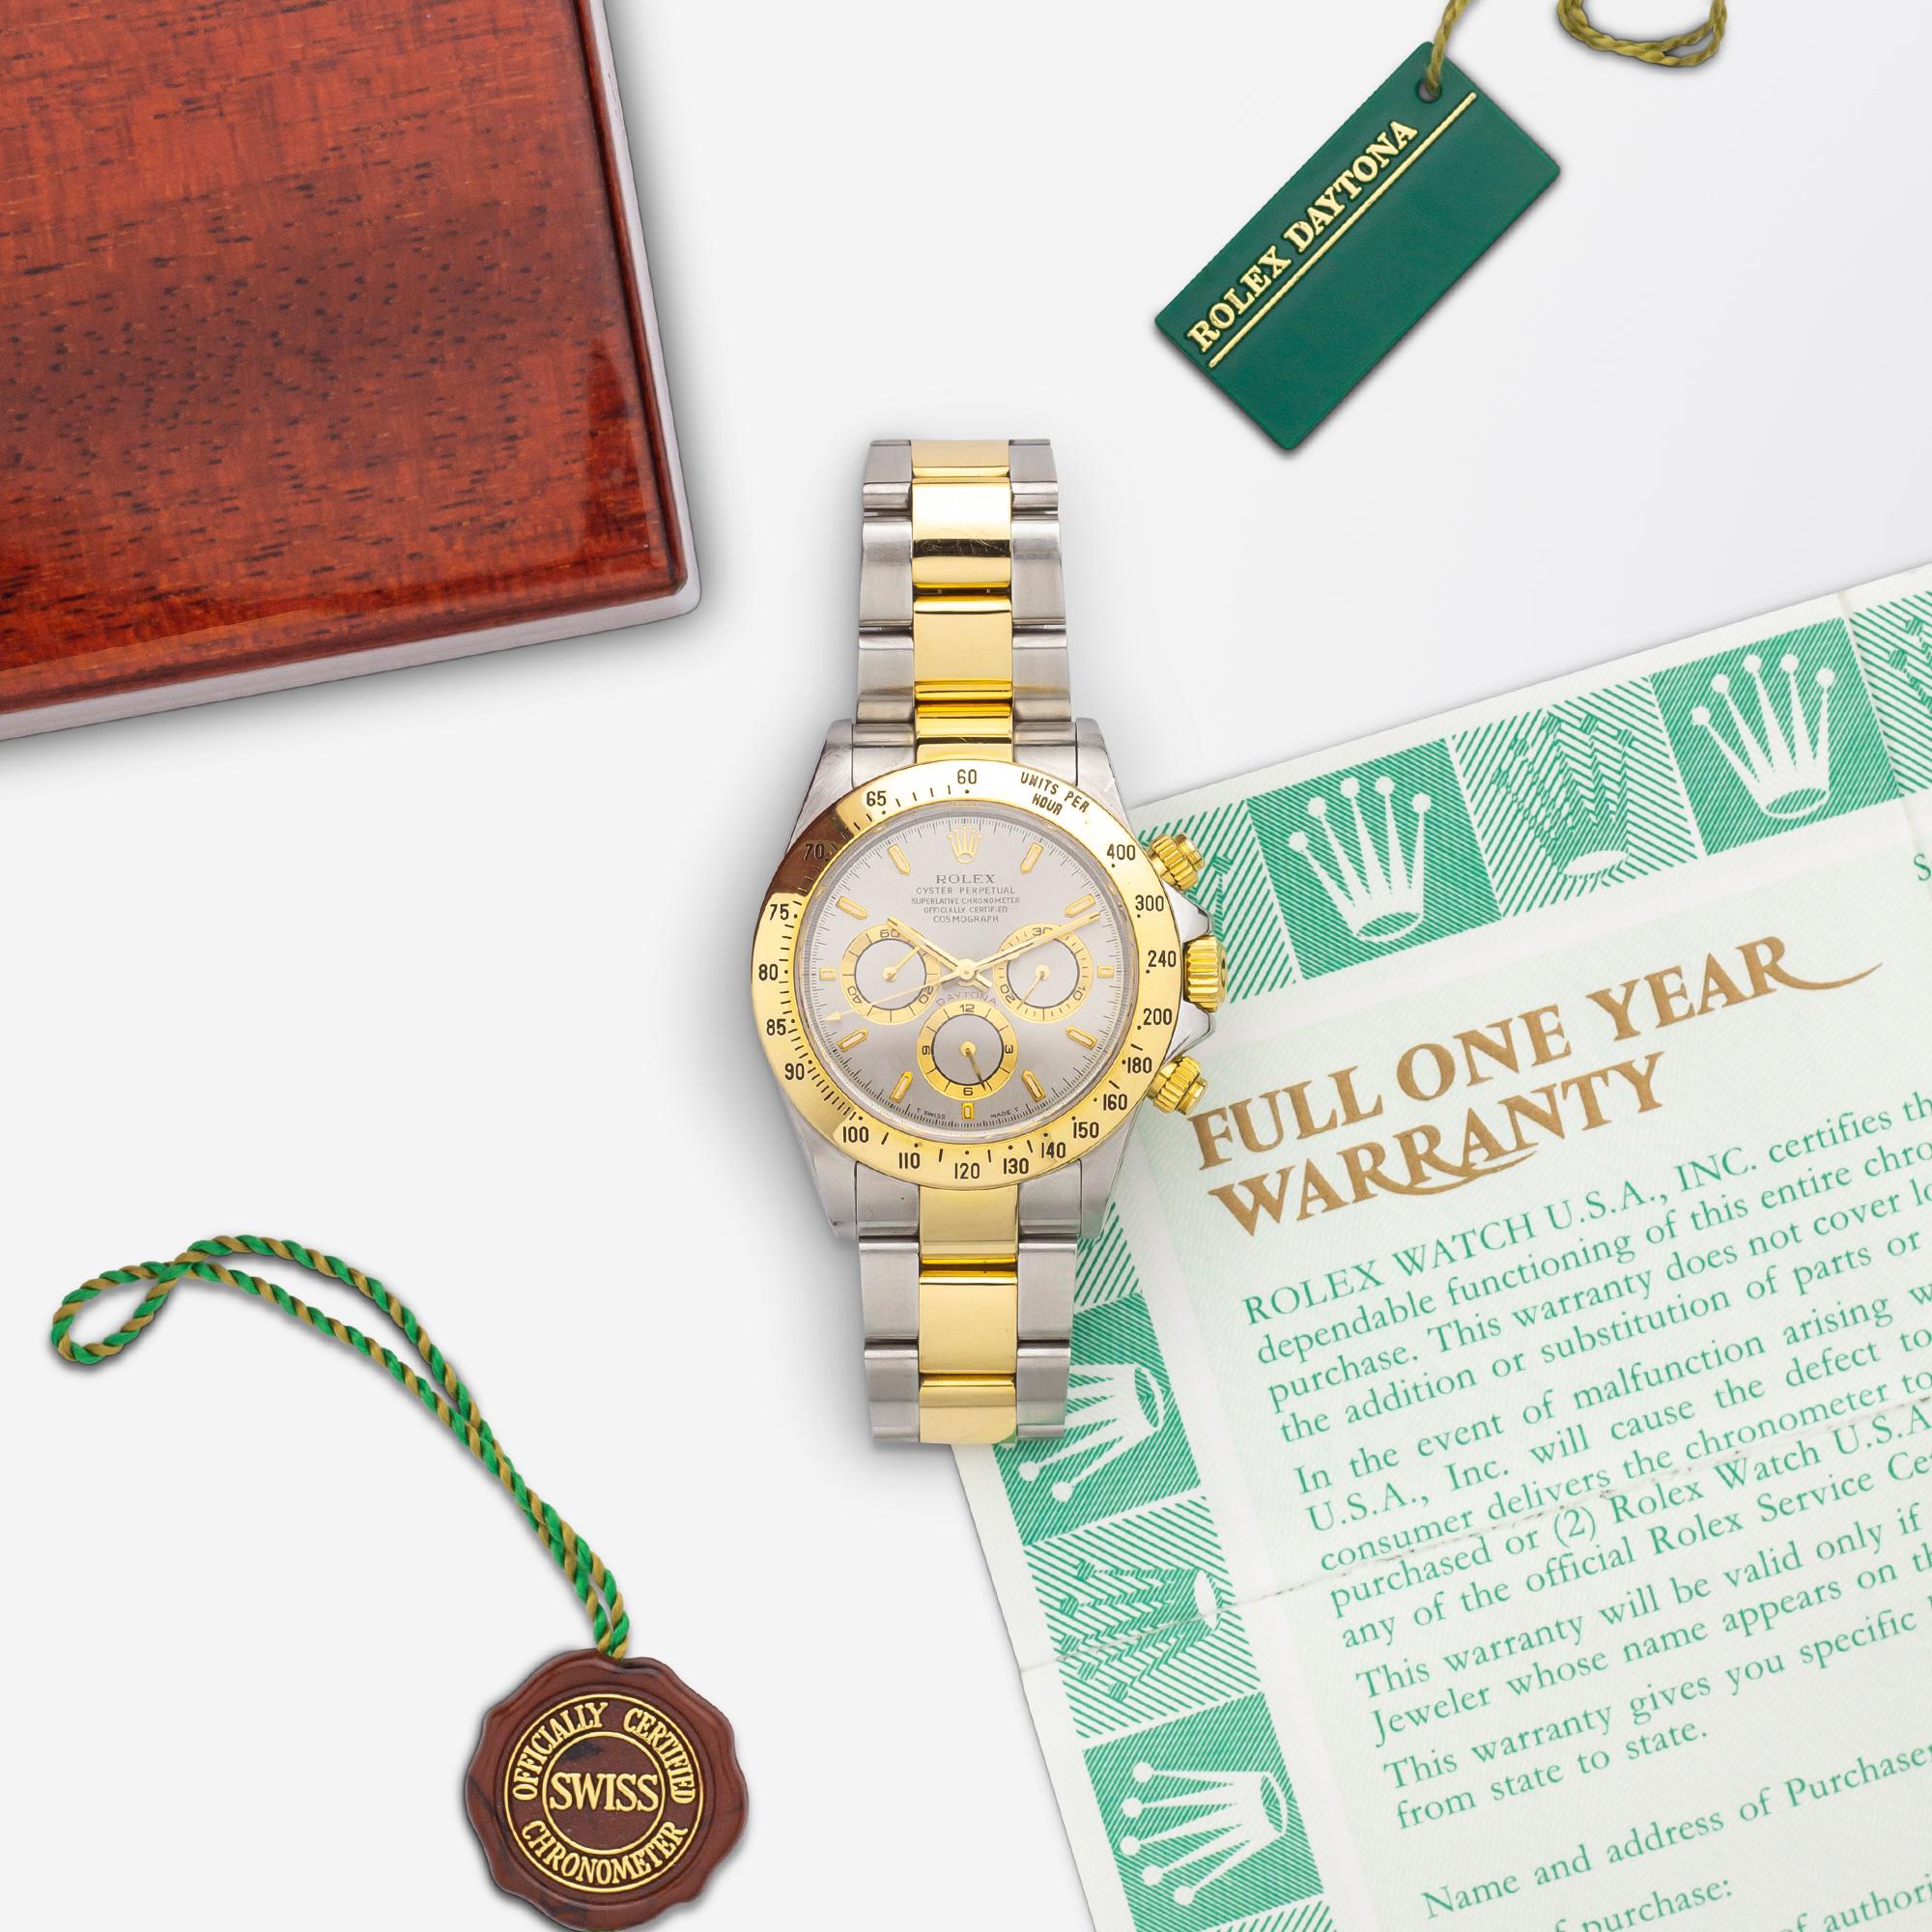 Rolex 'Oyster Perpetual Daytona' wrist watch in stainless steel and 18 karat yellow gold. The case of the watch is crafted from 18 karat yellow gold and stainless steel with a fixed 18 karat yellow gold units per hour bezel. The dial of the watch is